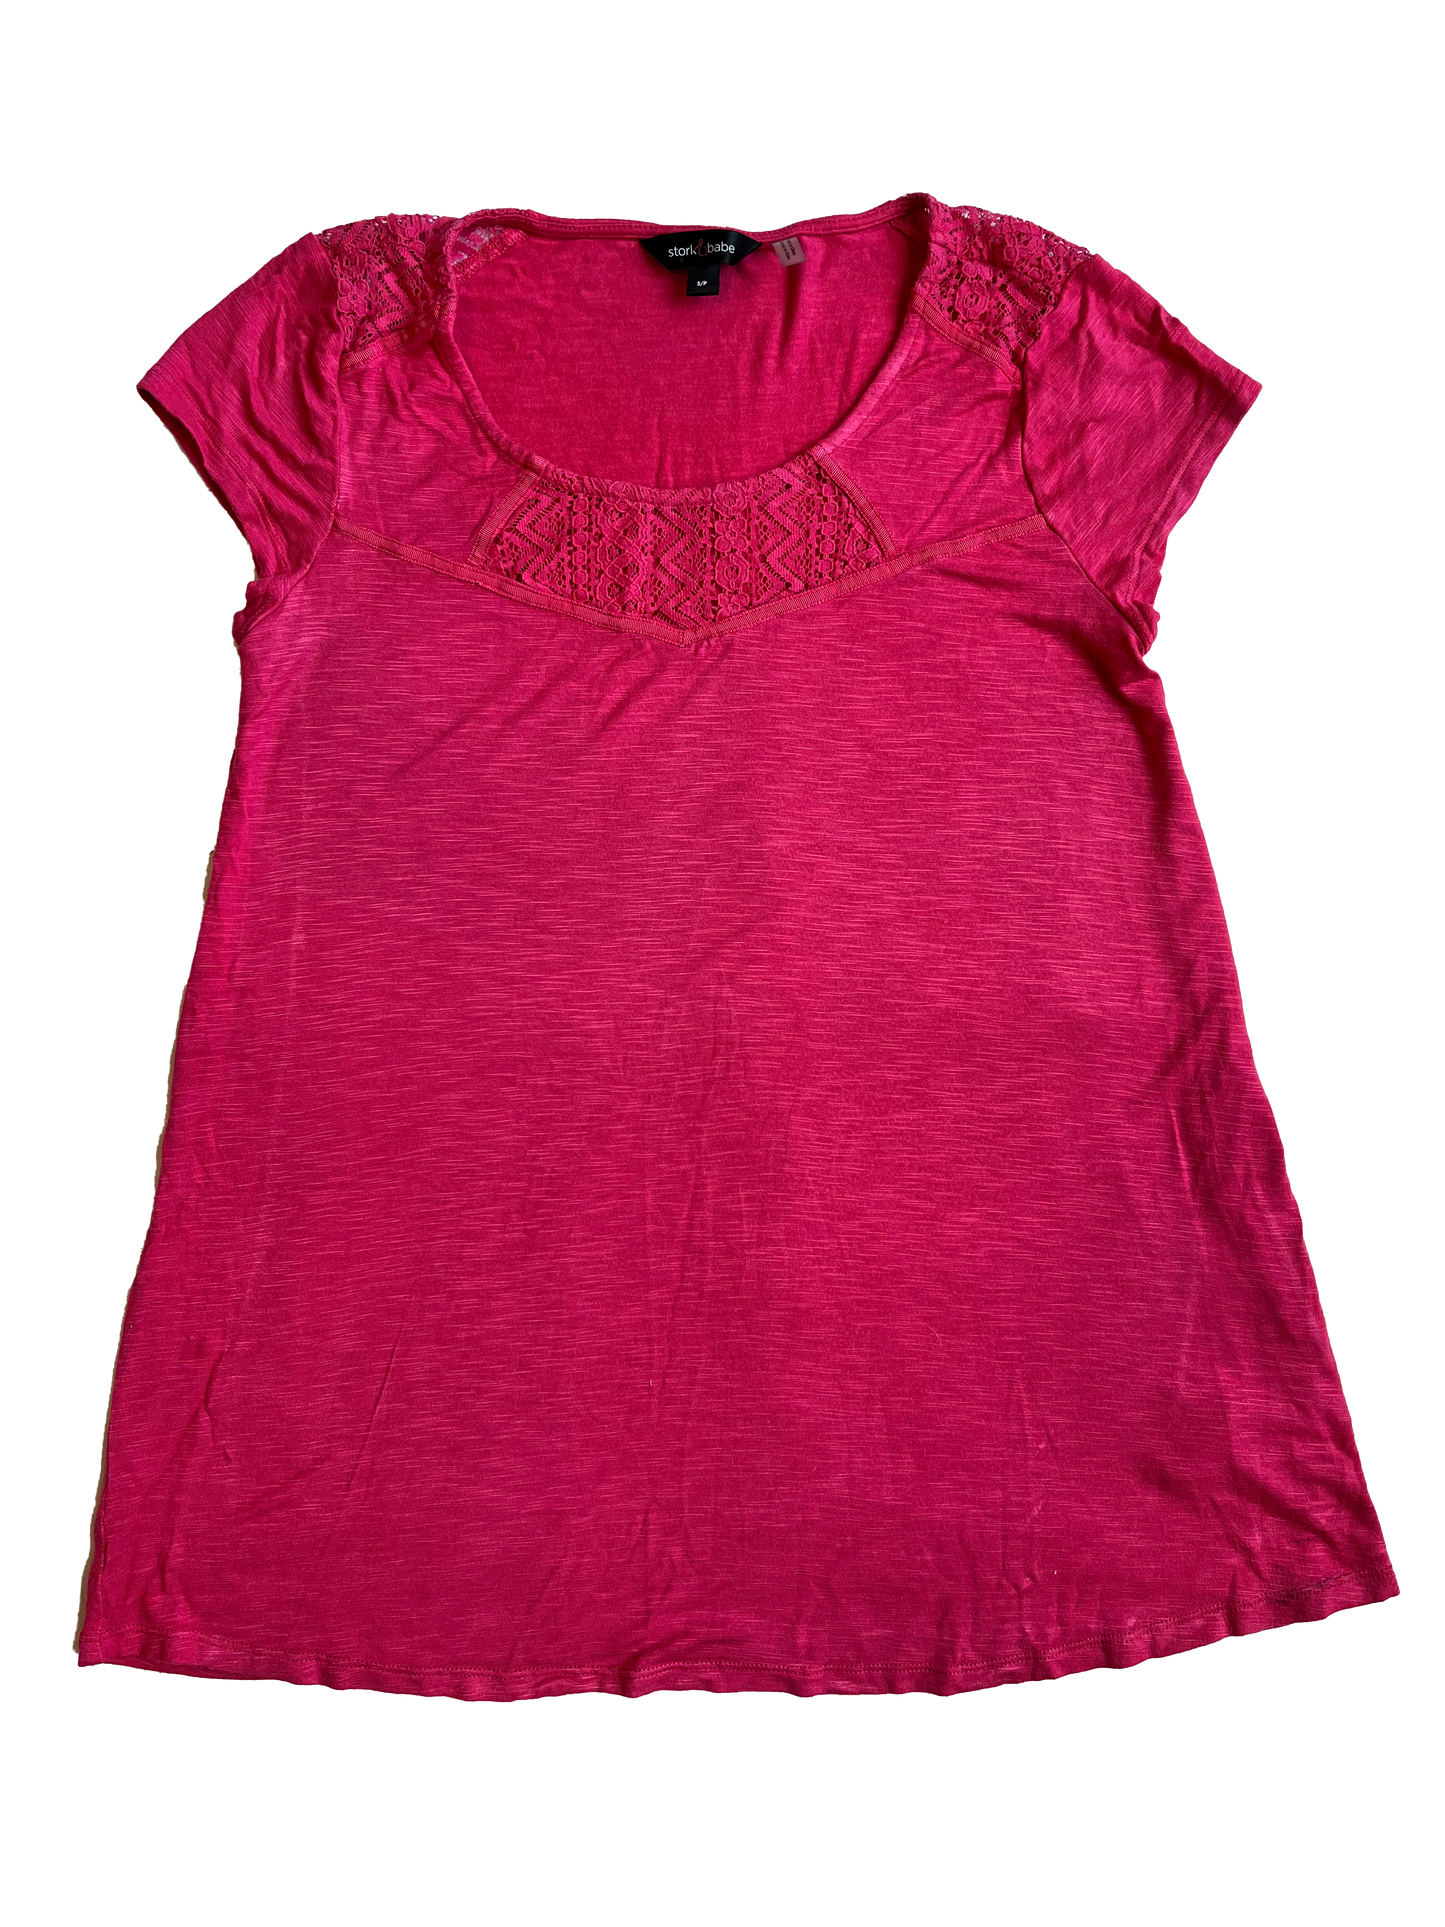 Stork & Baby Pink Maternity Top with Lace Sm